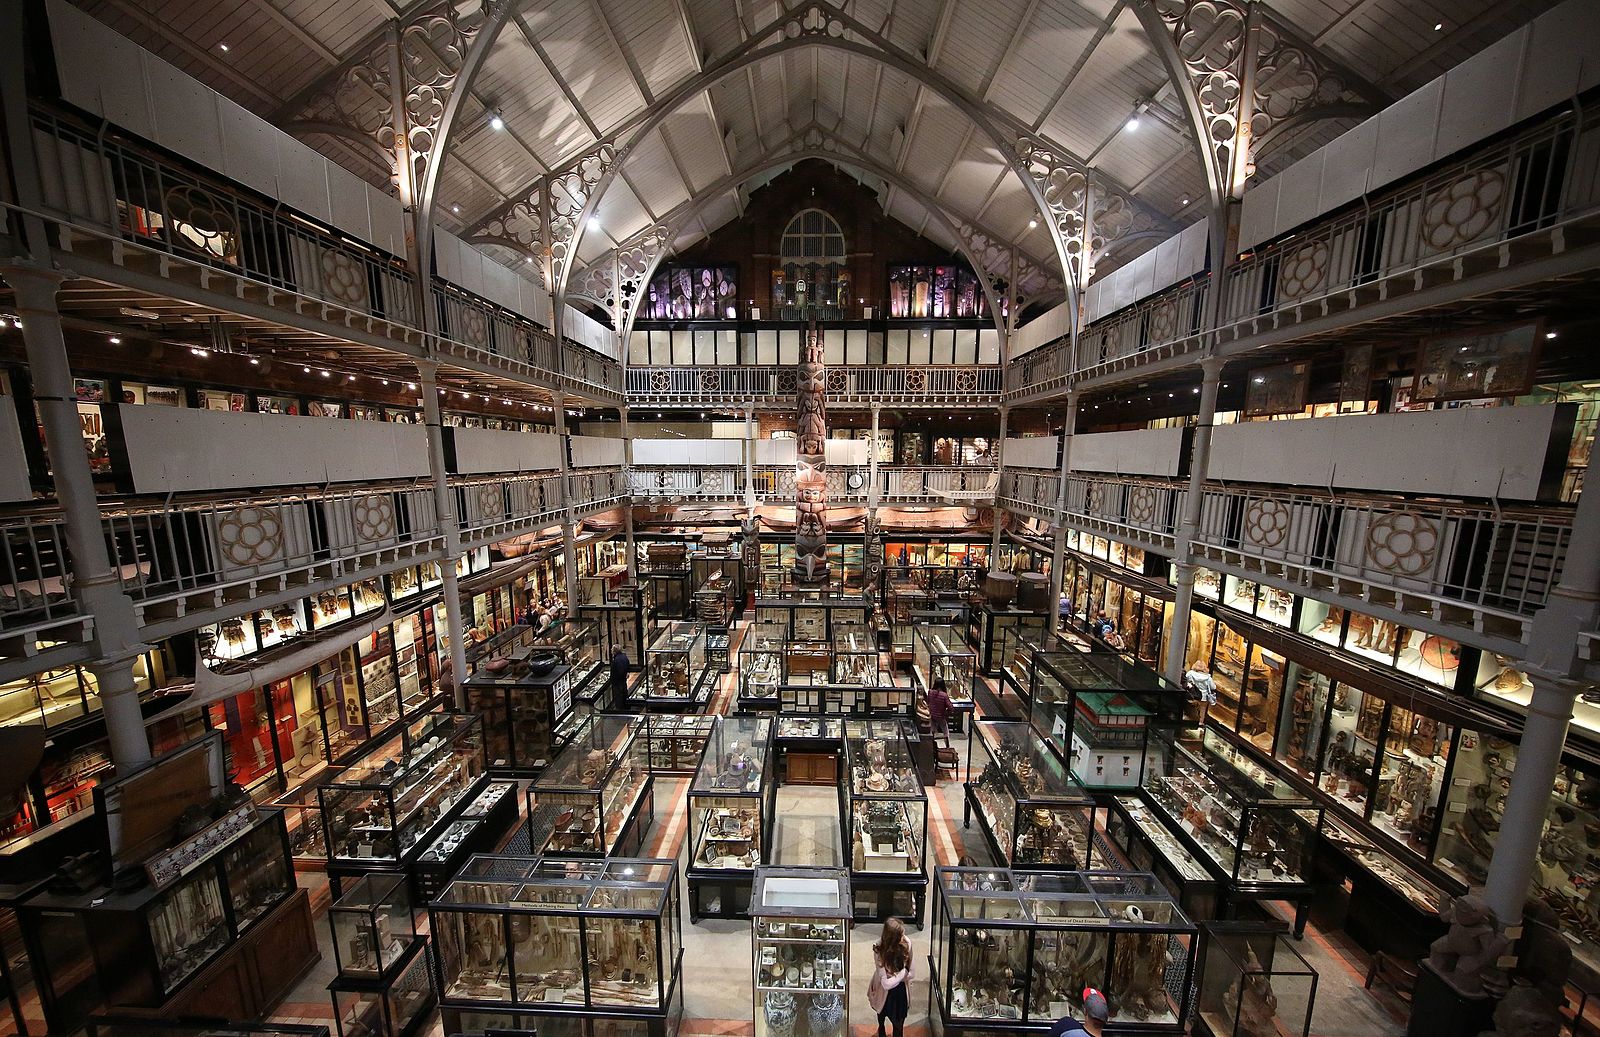 Exploring Humanity’s Heritage: A Journey through Pitt Rivers Museum